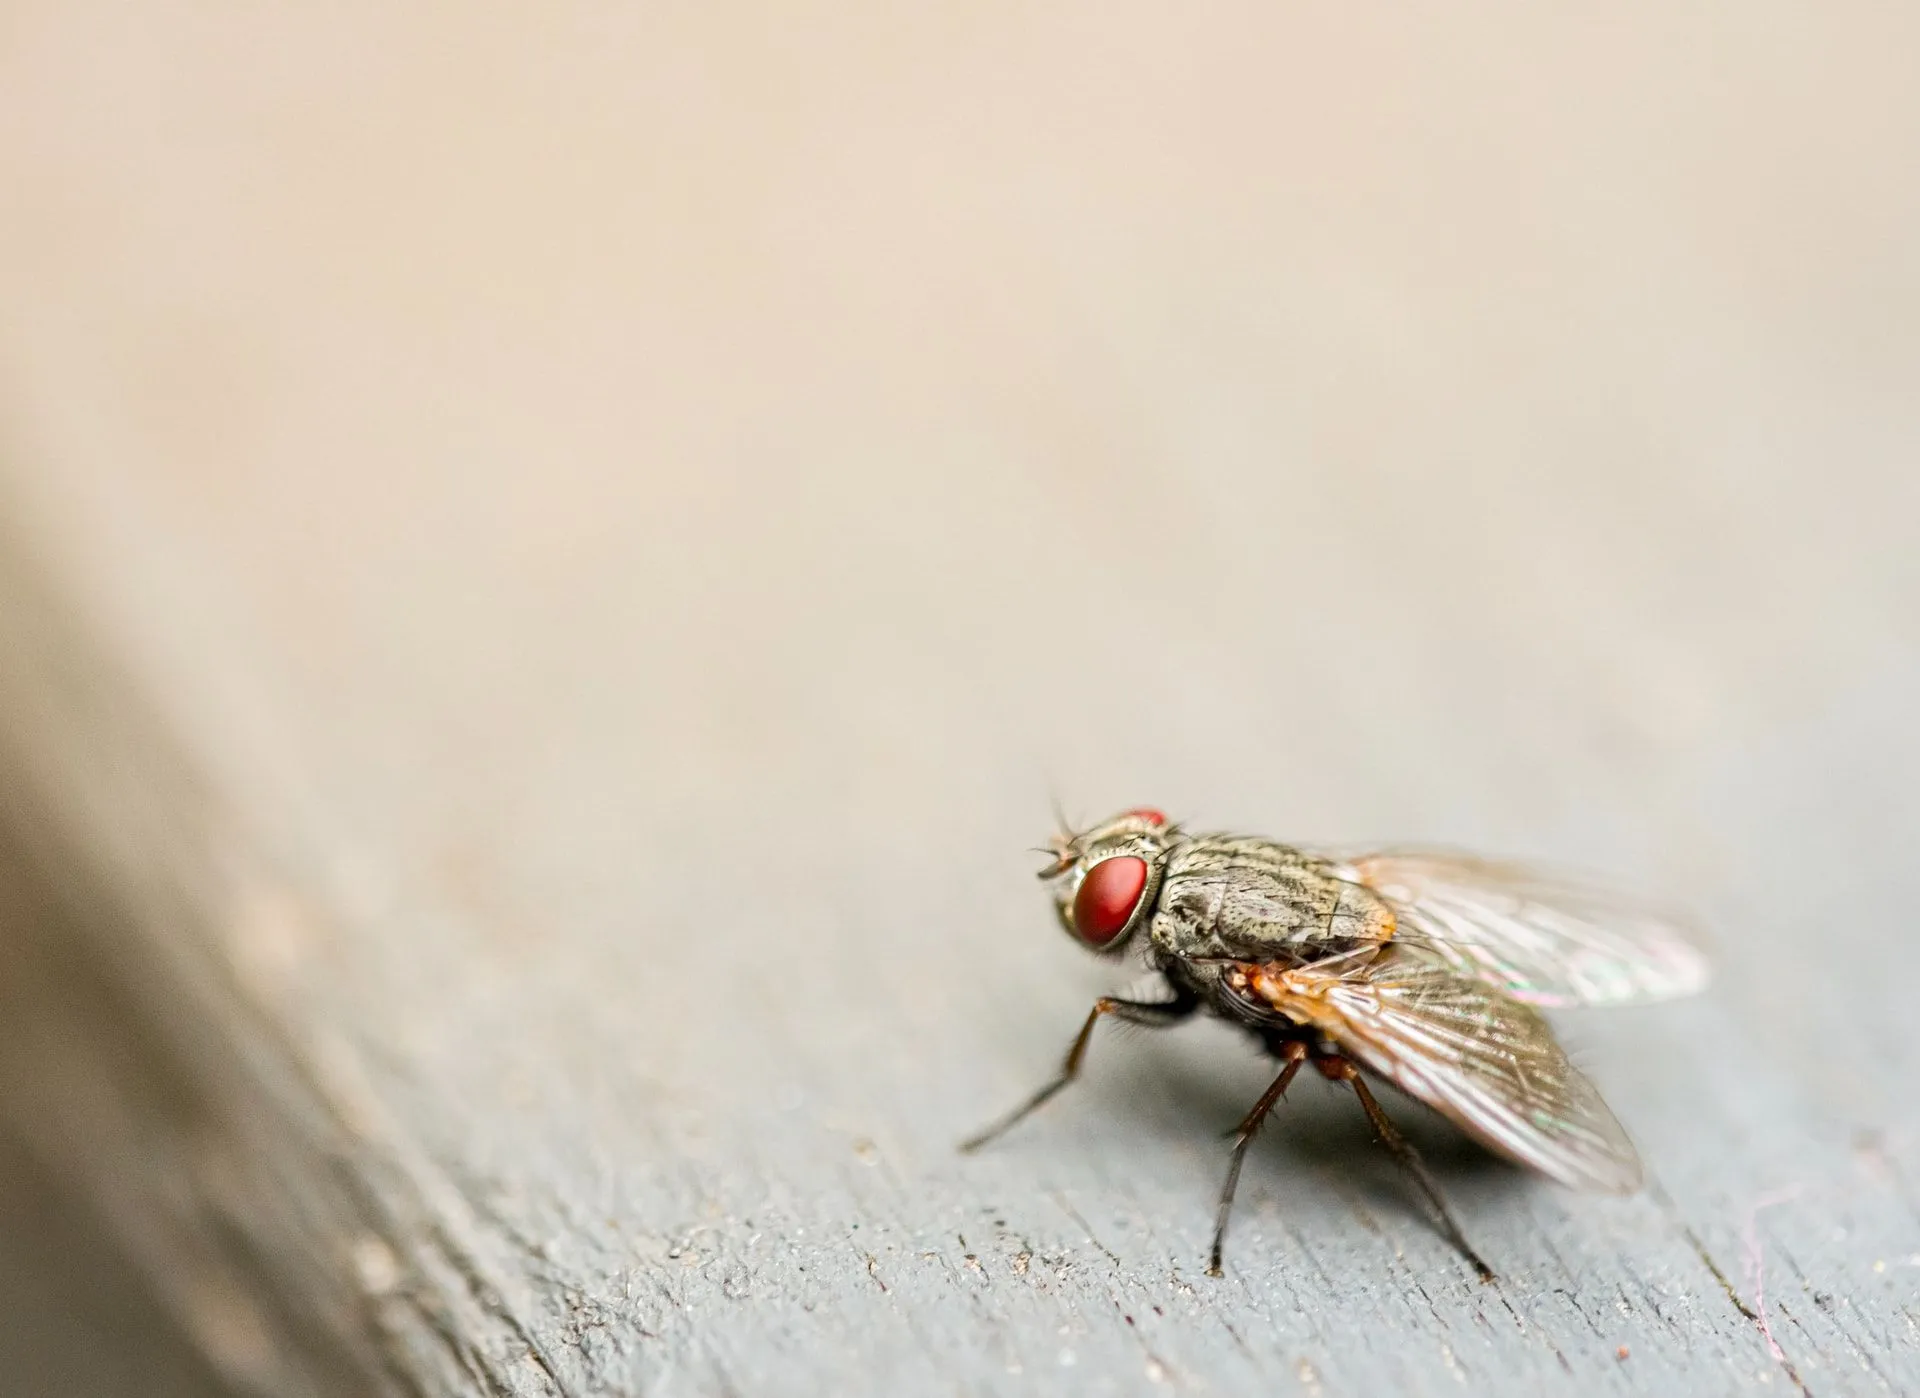 Flies sit on any surface and can spread diseases.